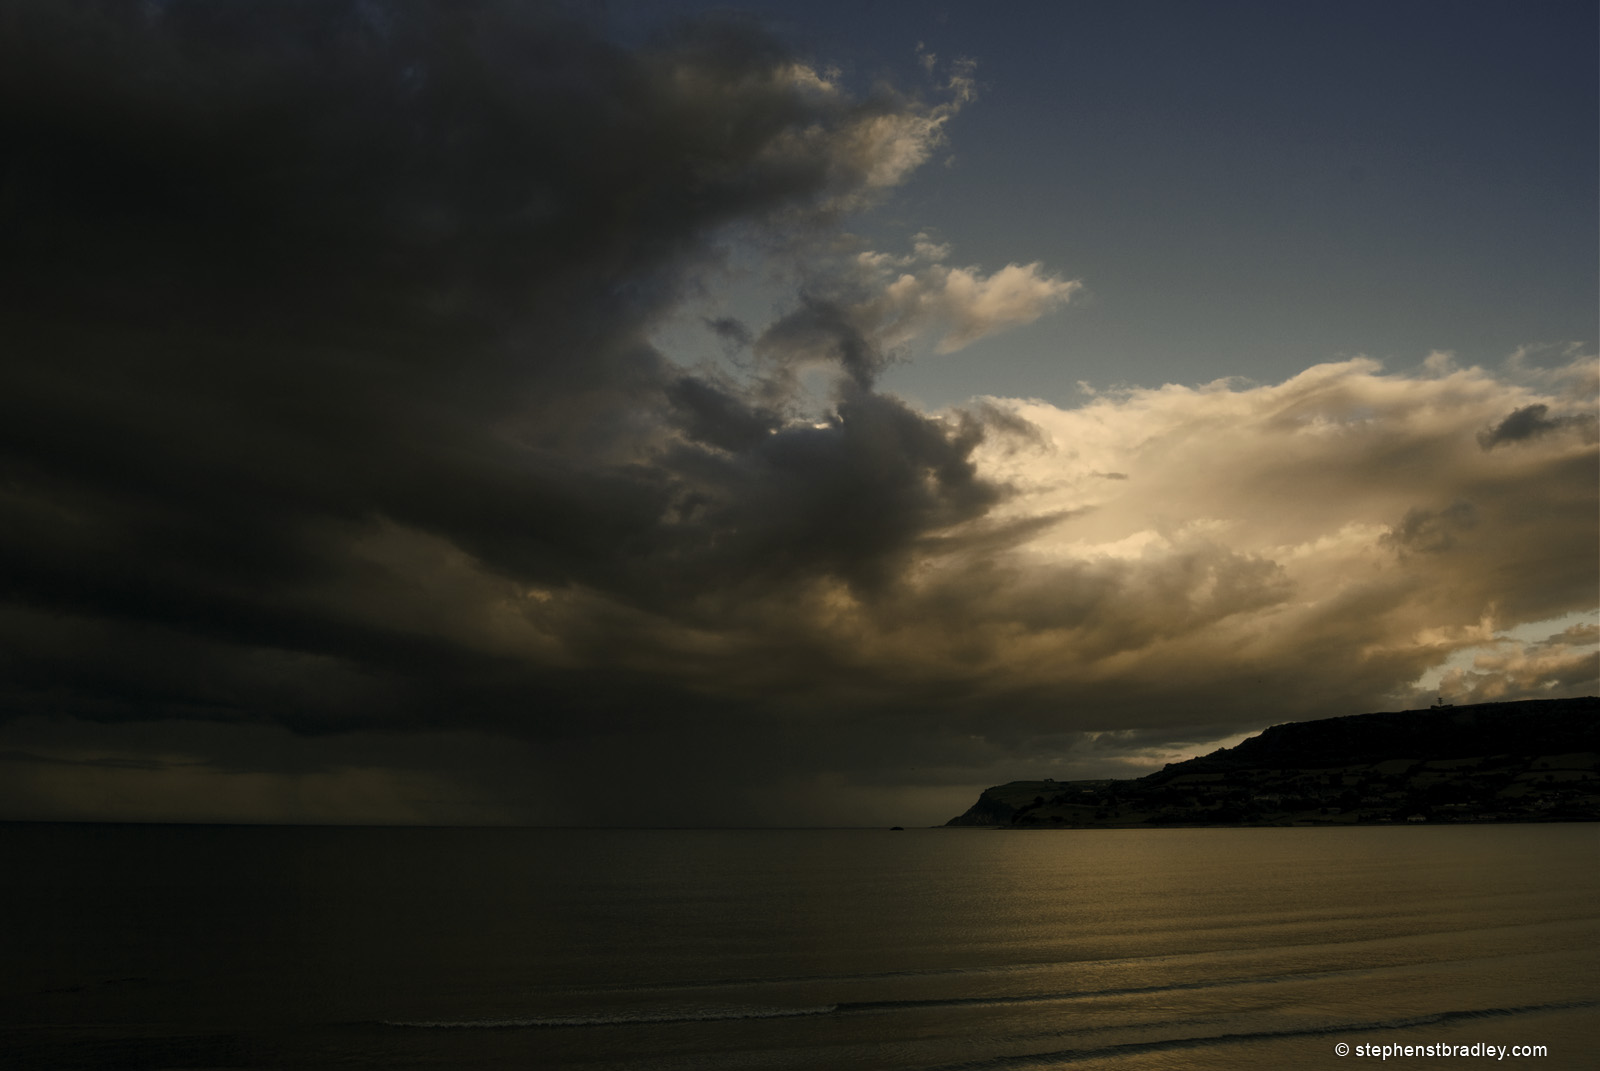 Landscape photograph of rain clouds over Irish Sea from Carnlough, Northern Ireland, by Stephen Bradley photographer - photograph 2546.